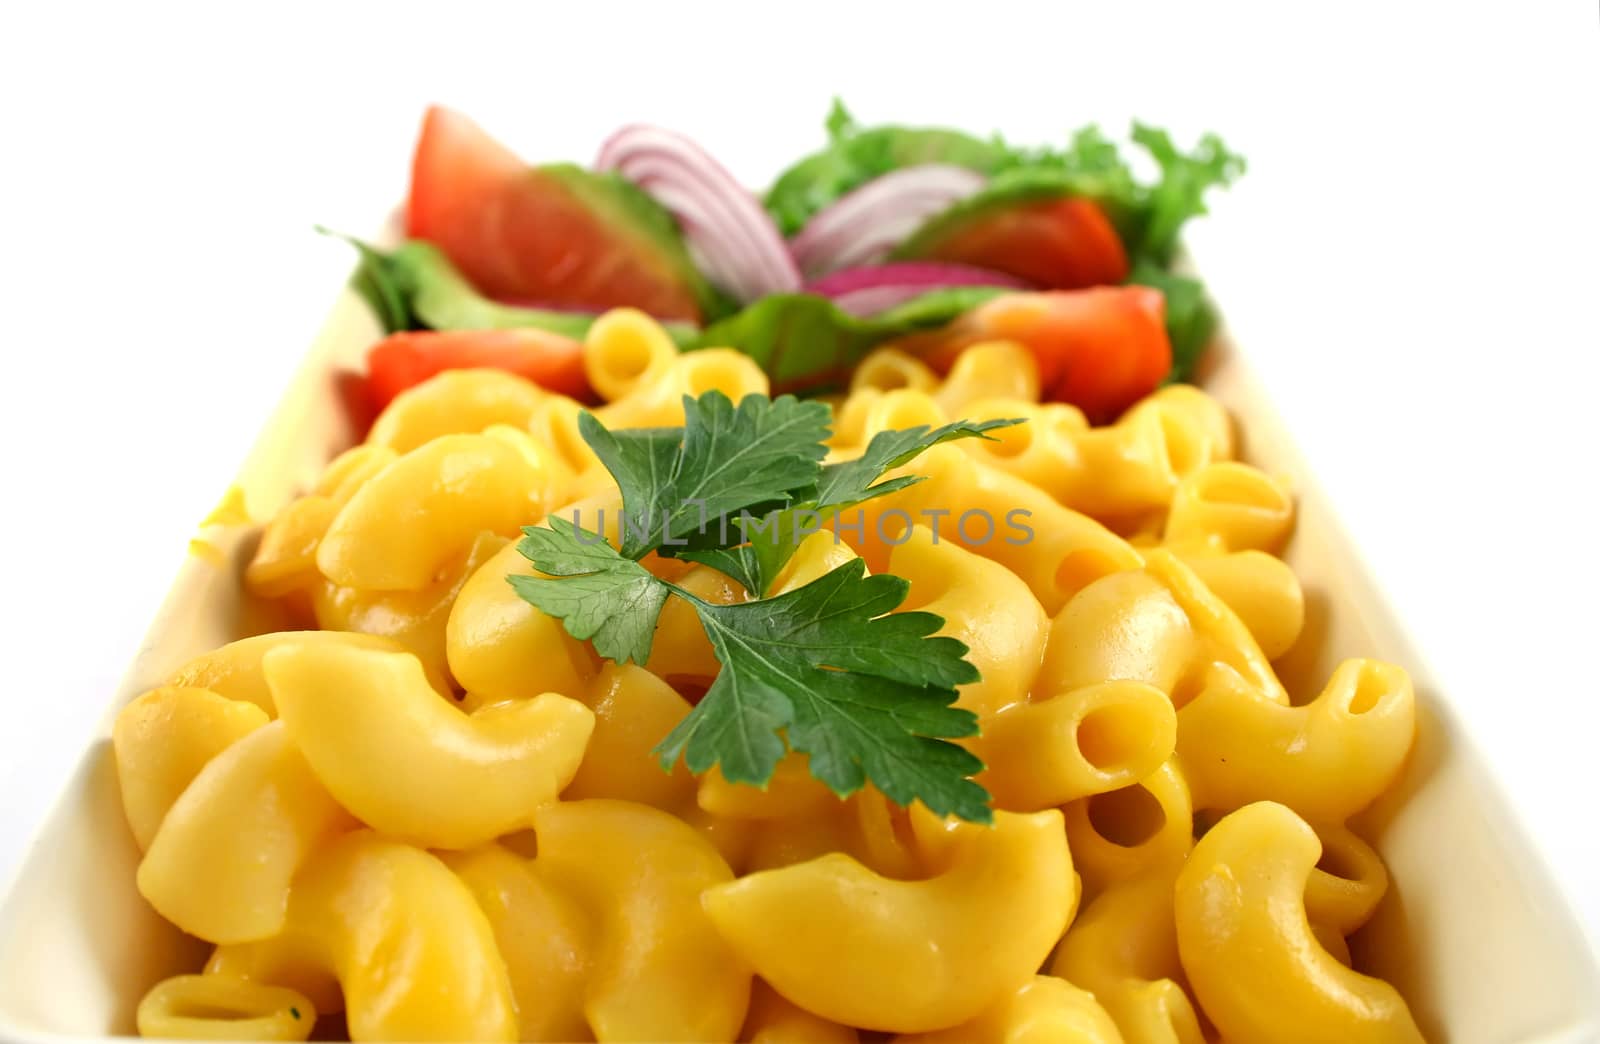 Macaroni cheese and a fresh garden salad ready to serve.